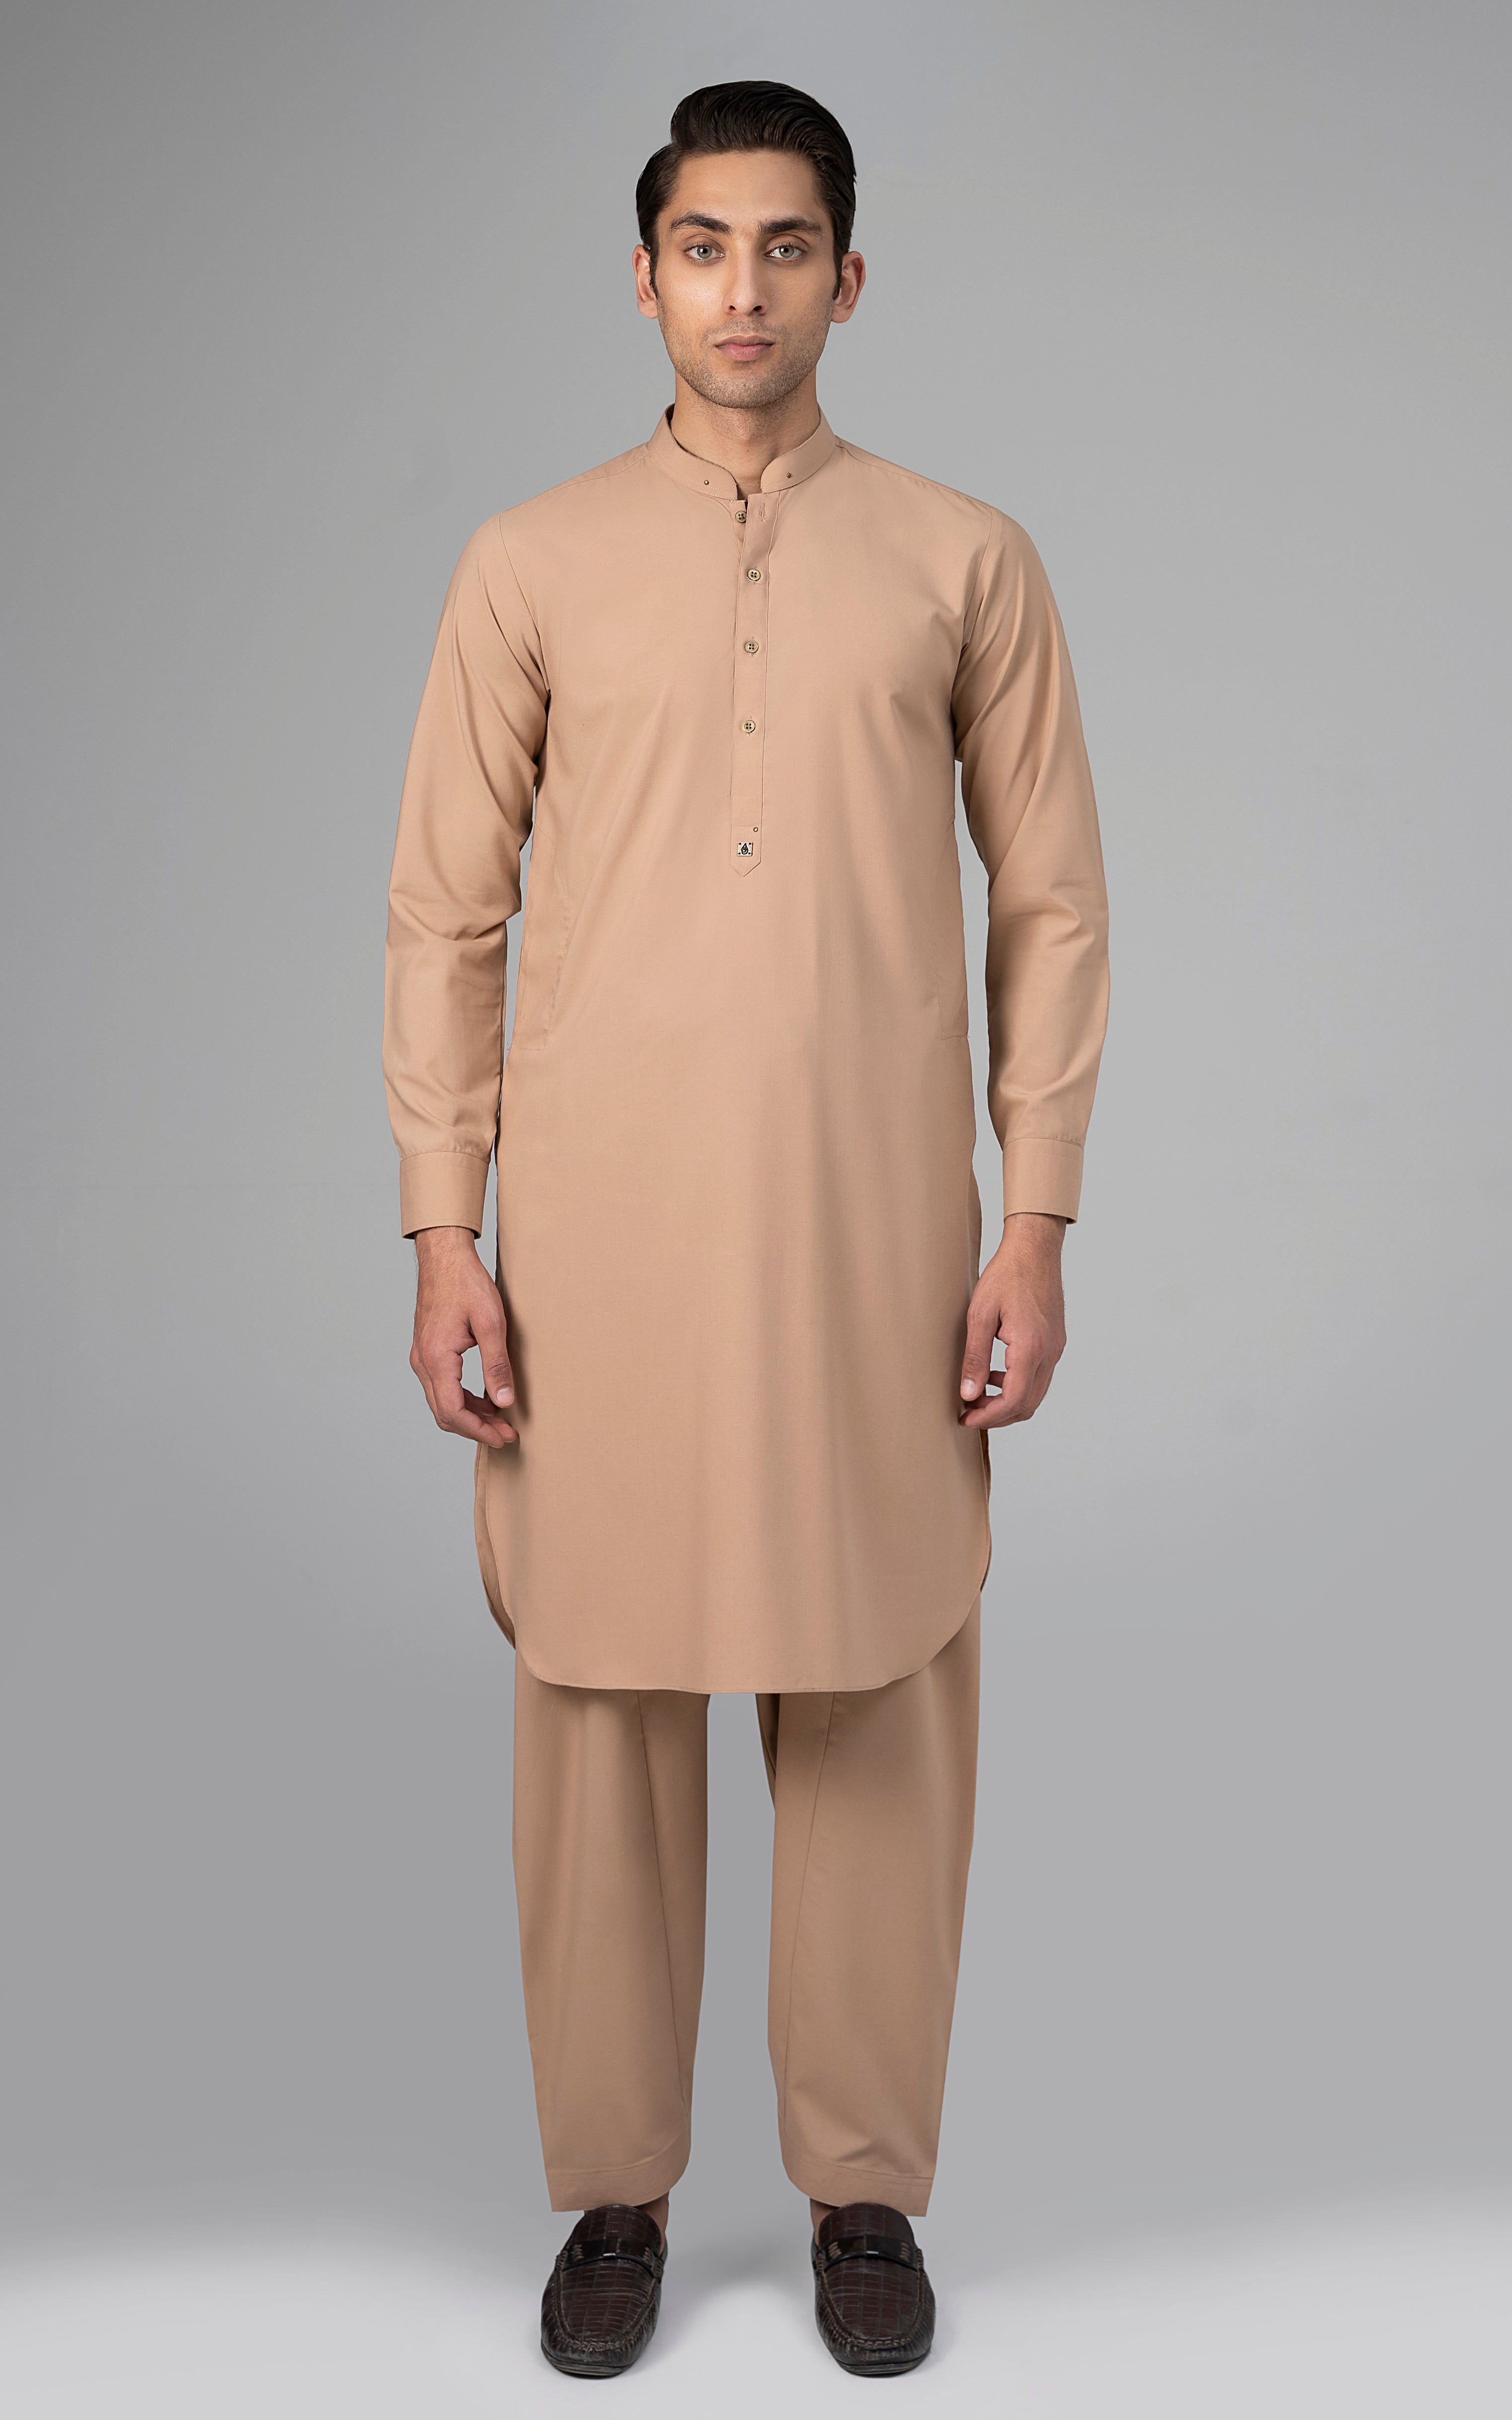 WASH & WEAR -CLASSIC COLLECTION BEIGE